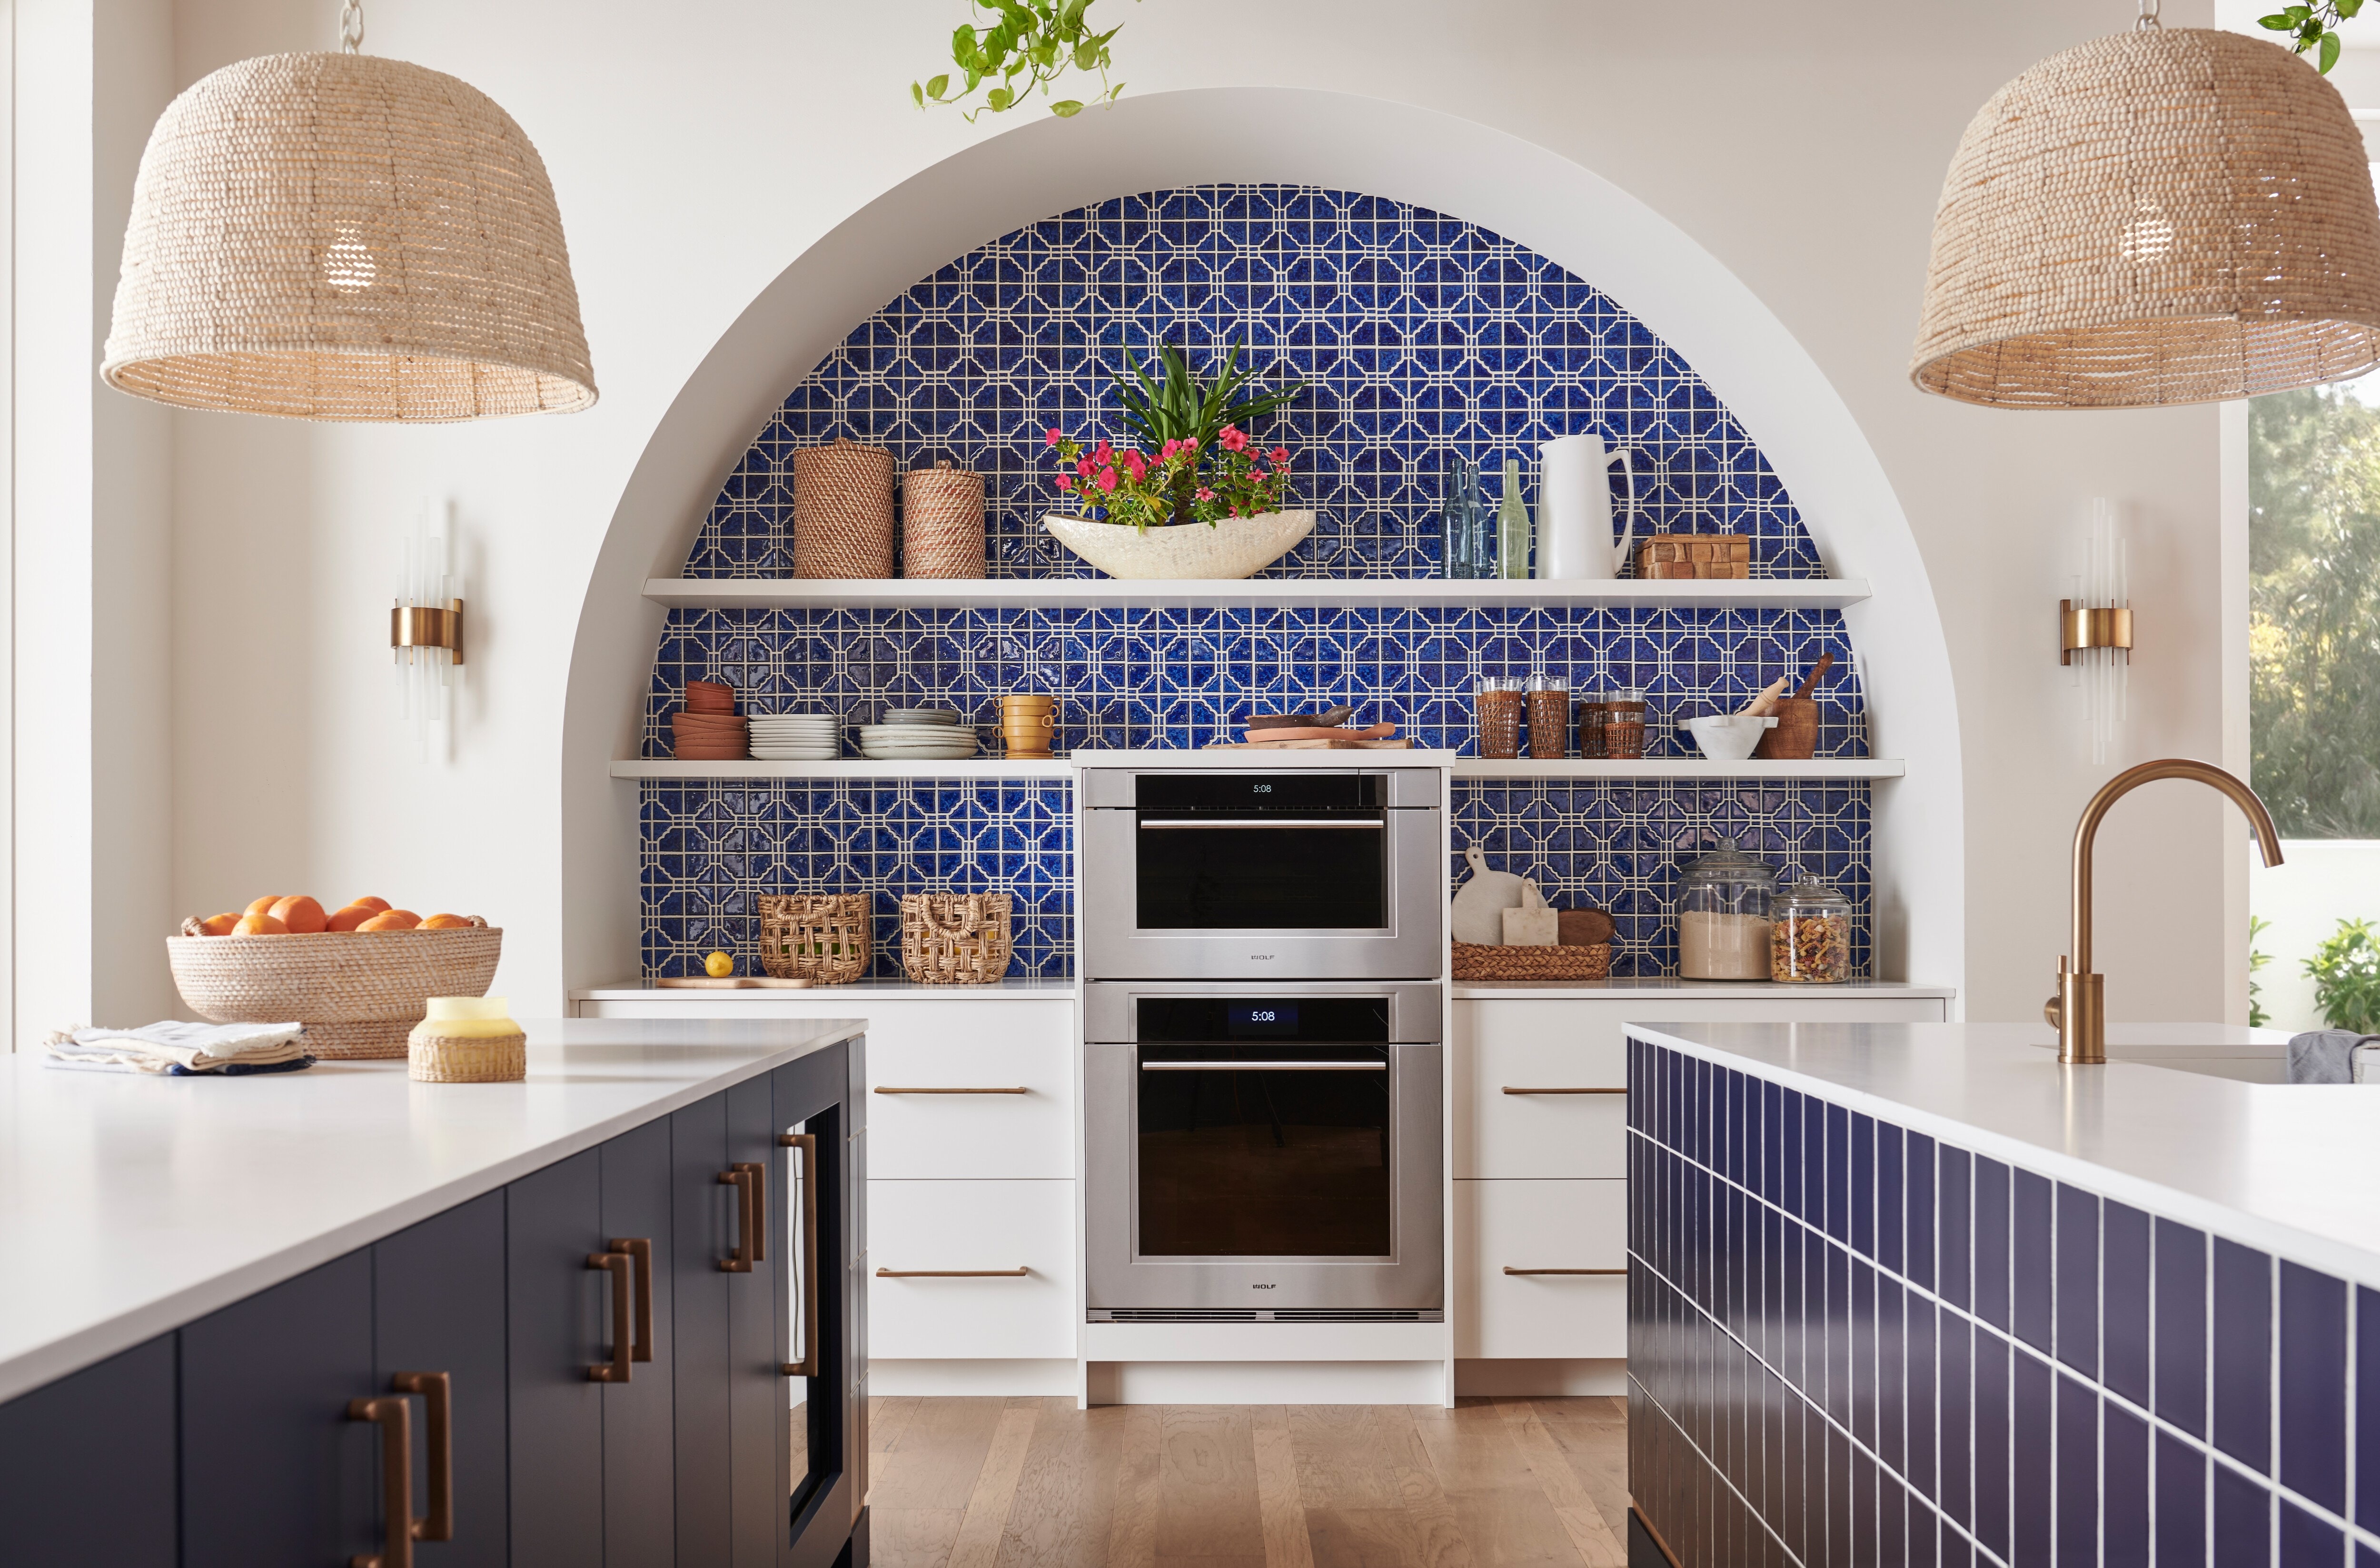 Wolf 30 inch M Series Transitional Convection Steam Oven and Wolf 30 inch M Series Transitional Built-In Single Oven shown together in a custom Mediterranean kitchen design featuring blue tiles, open sheles and gold fixtures